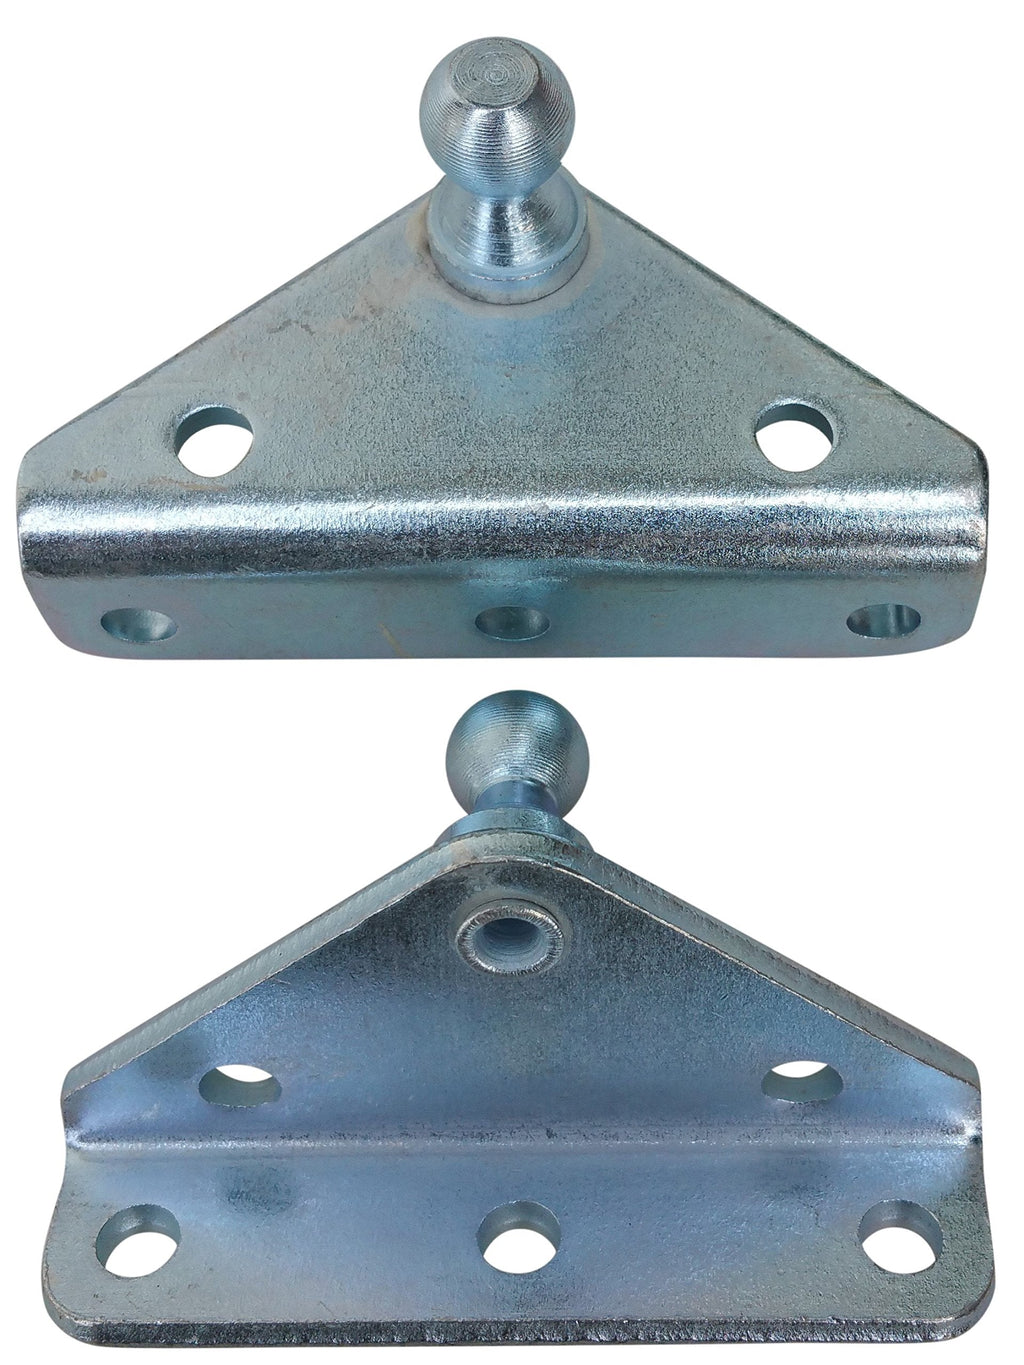 Angled Lift Support Bracket Outside Mount - Zinc Plated 10 Gauge Steel - 10mm Ball Stud - Gas Shock Mounting - Lid Strut Prop Spring Mount 2 Small Outside Mount